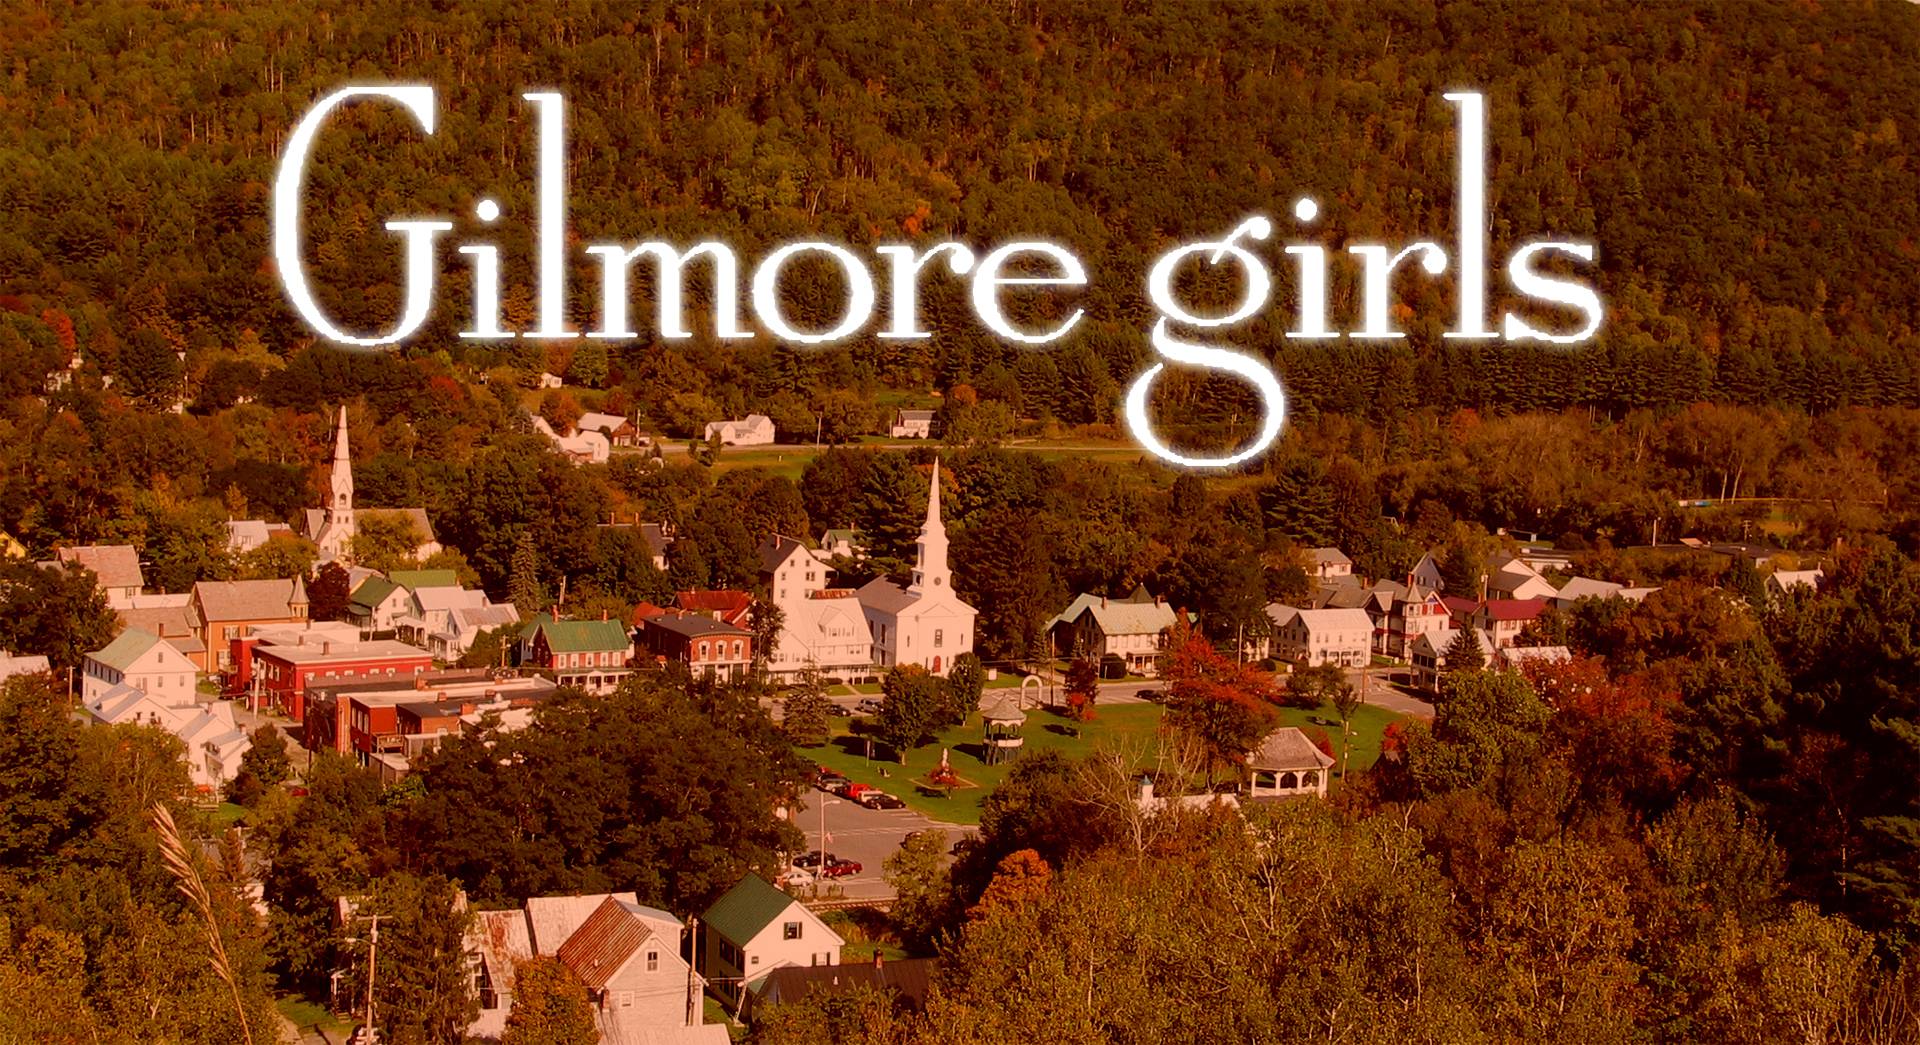 I made a Gilmore Girls title screen wallpaper